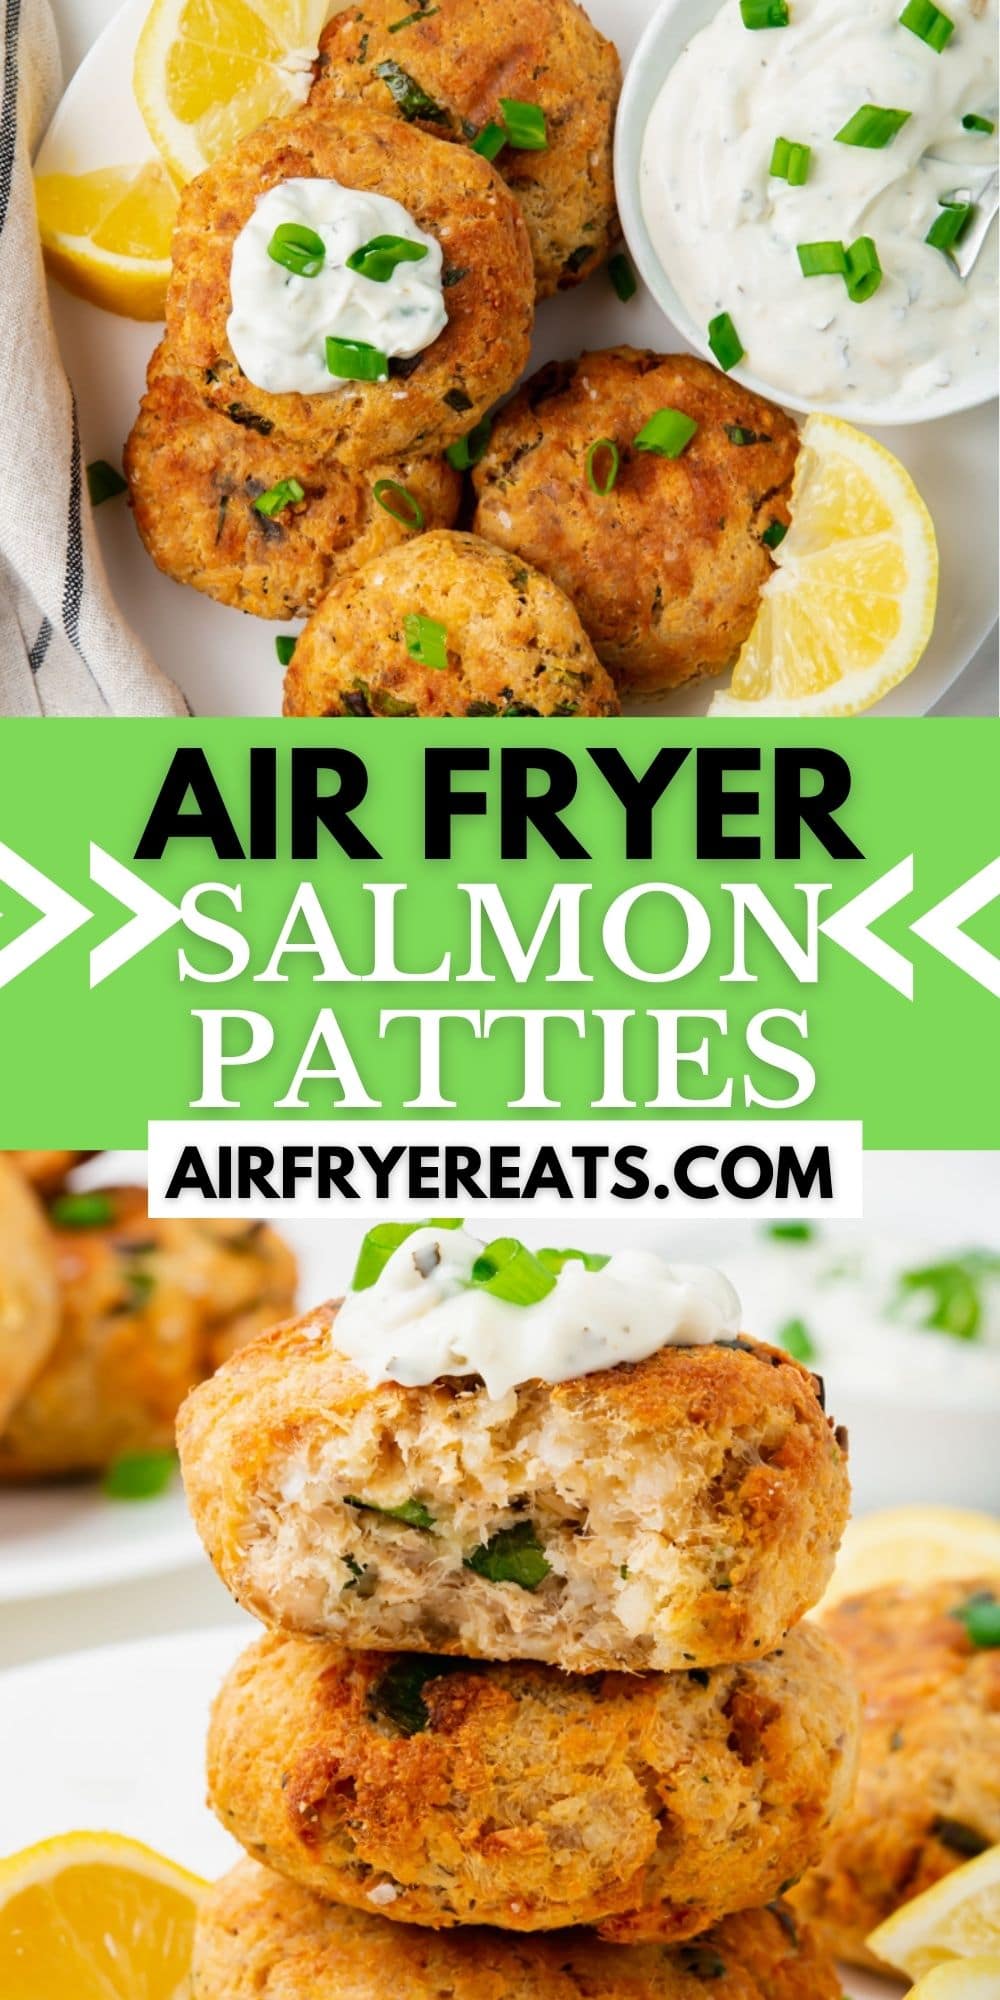 Delicious Air Fryer Salmon Patties are ready in just a few minutes! Crispy on the outside and packed with salmon and the perfect seasonings, you'll love this recipe for simple dinners or lunches. #salmonpatties via @vegetarianmamma